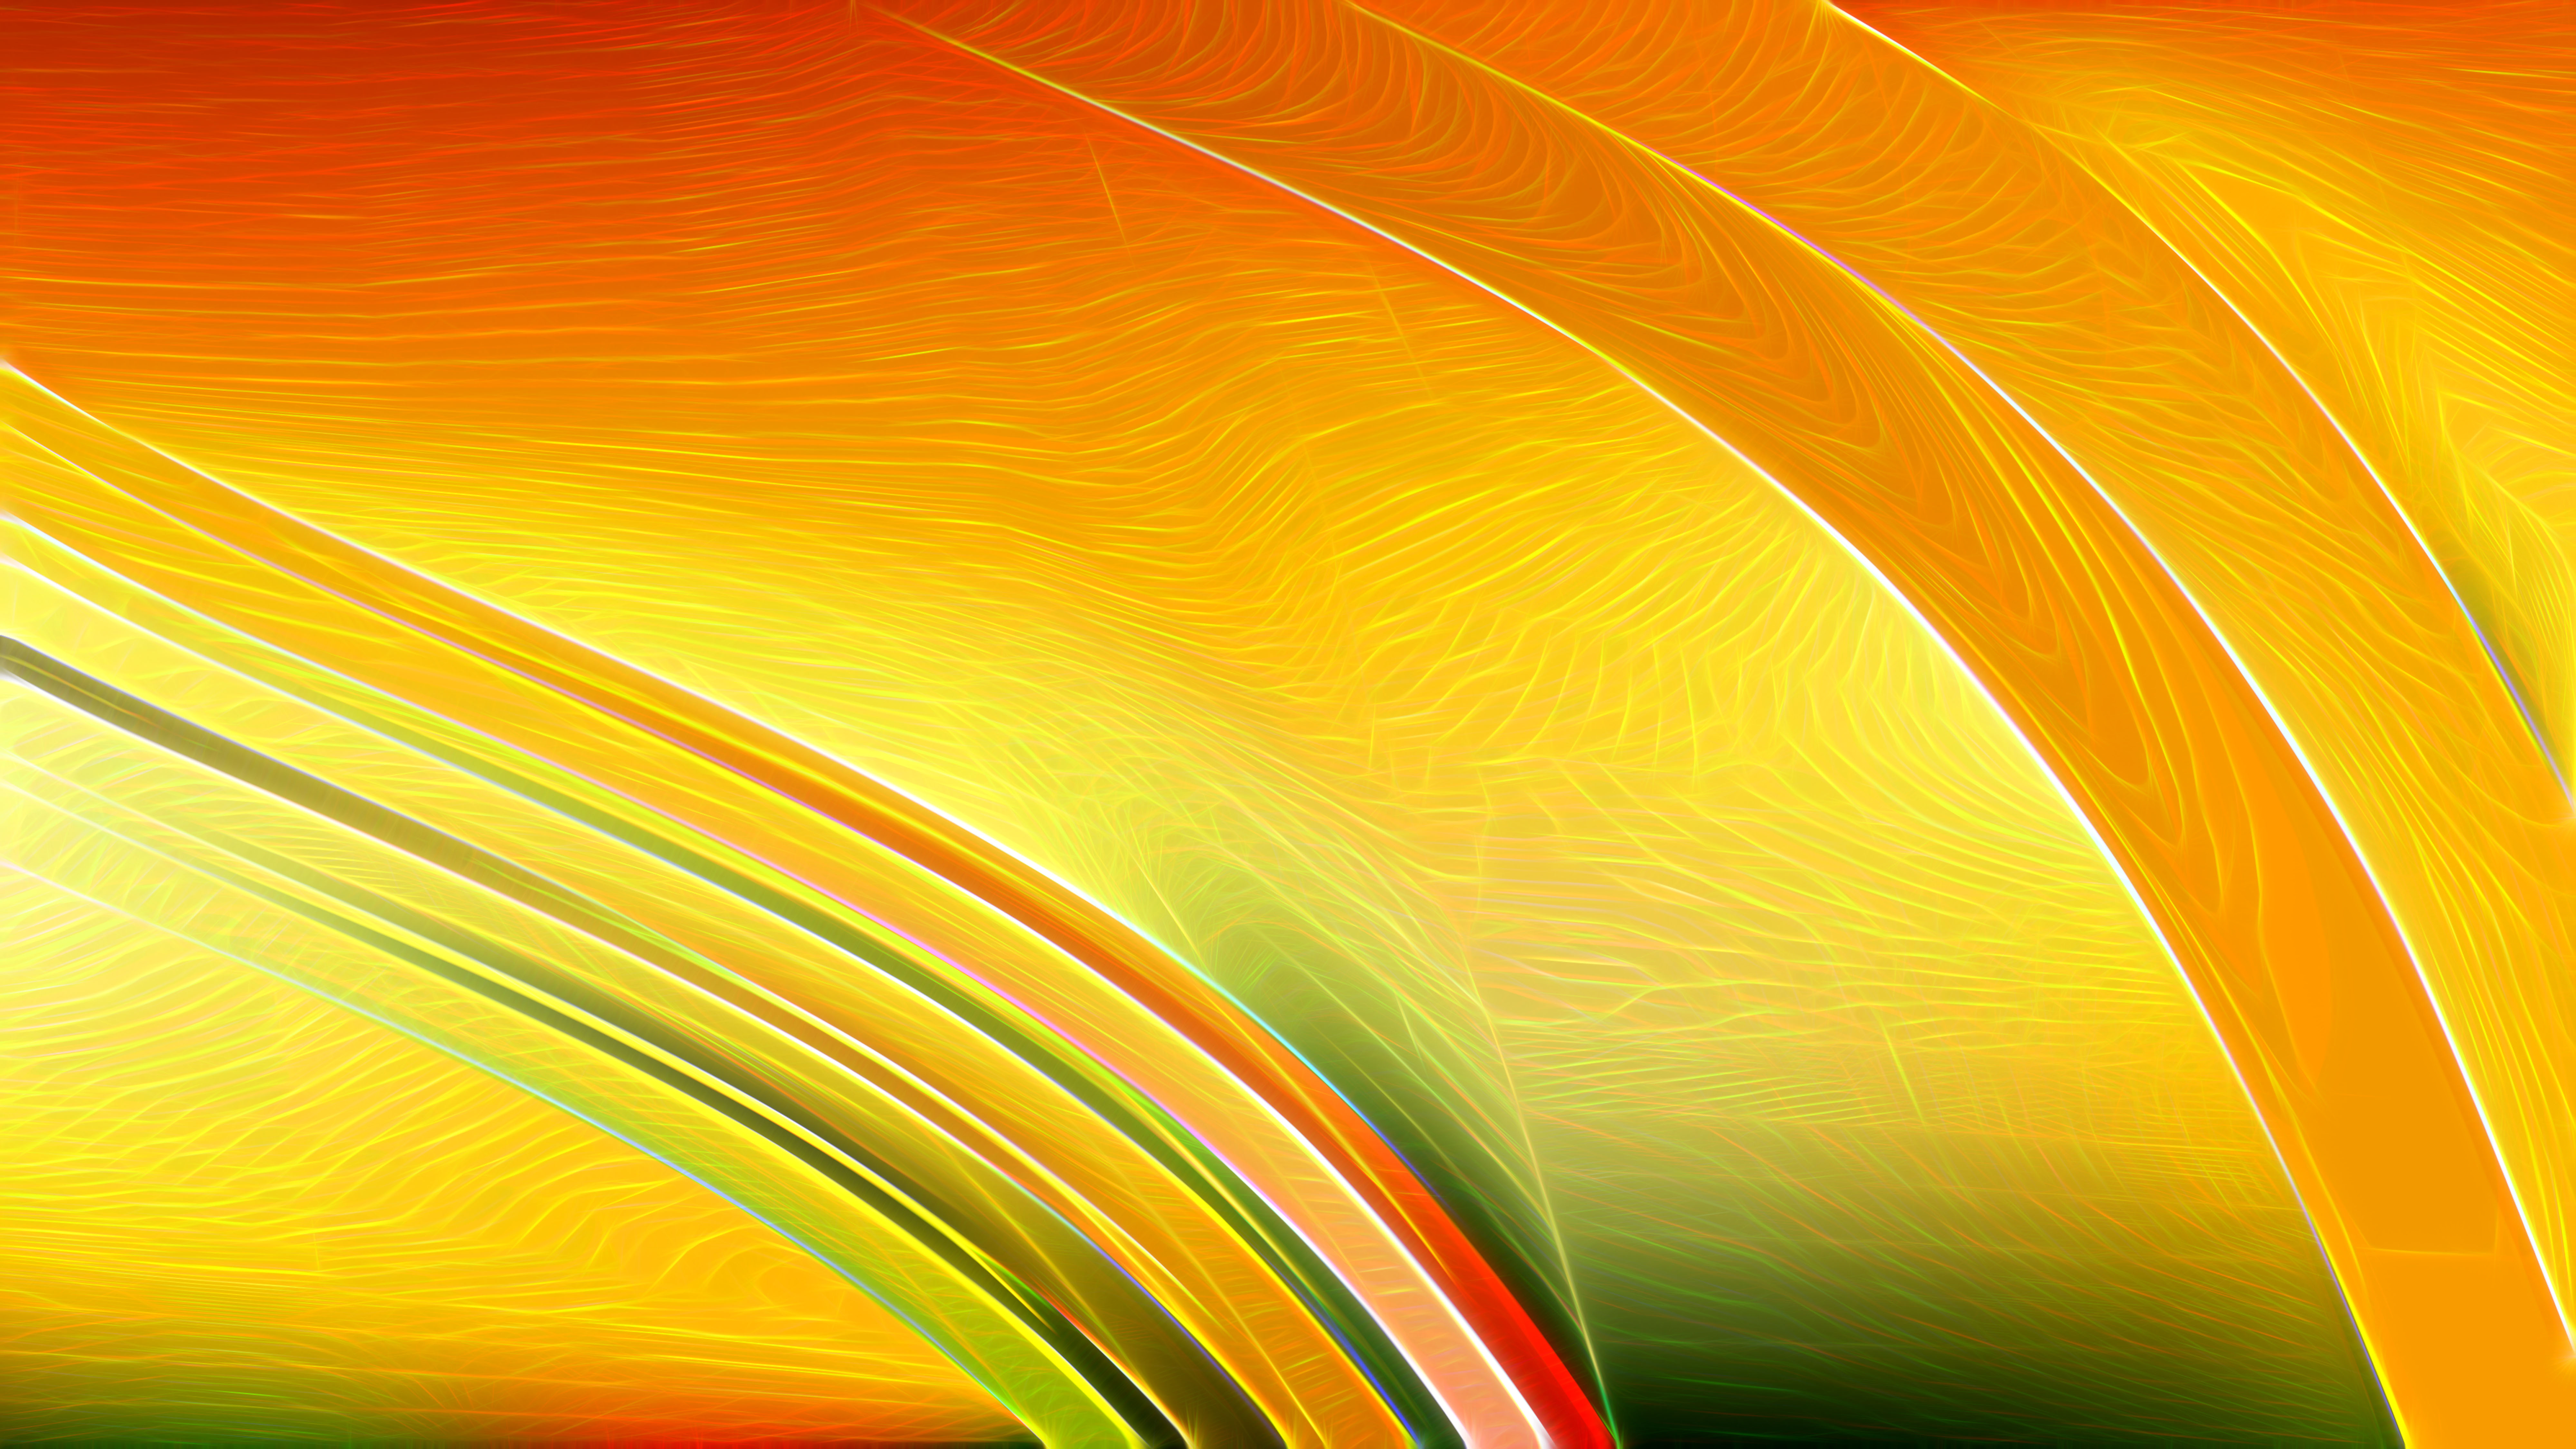 Free Abstract Orange and Green Texture Background Design